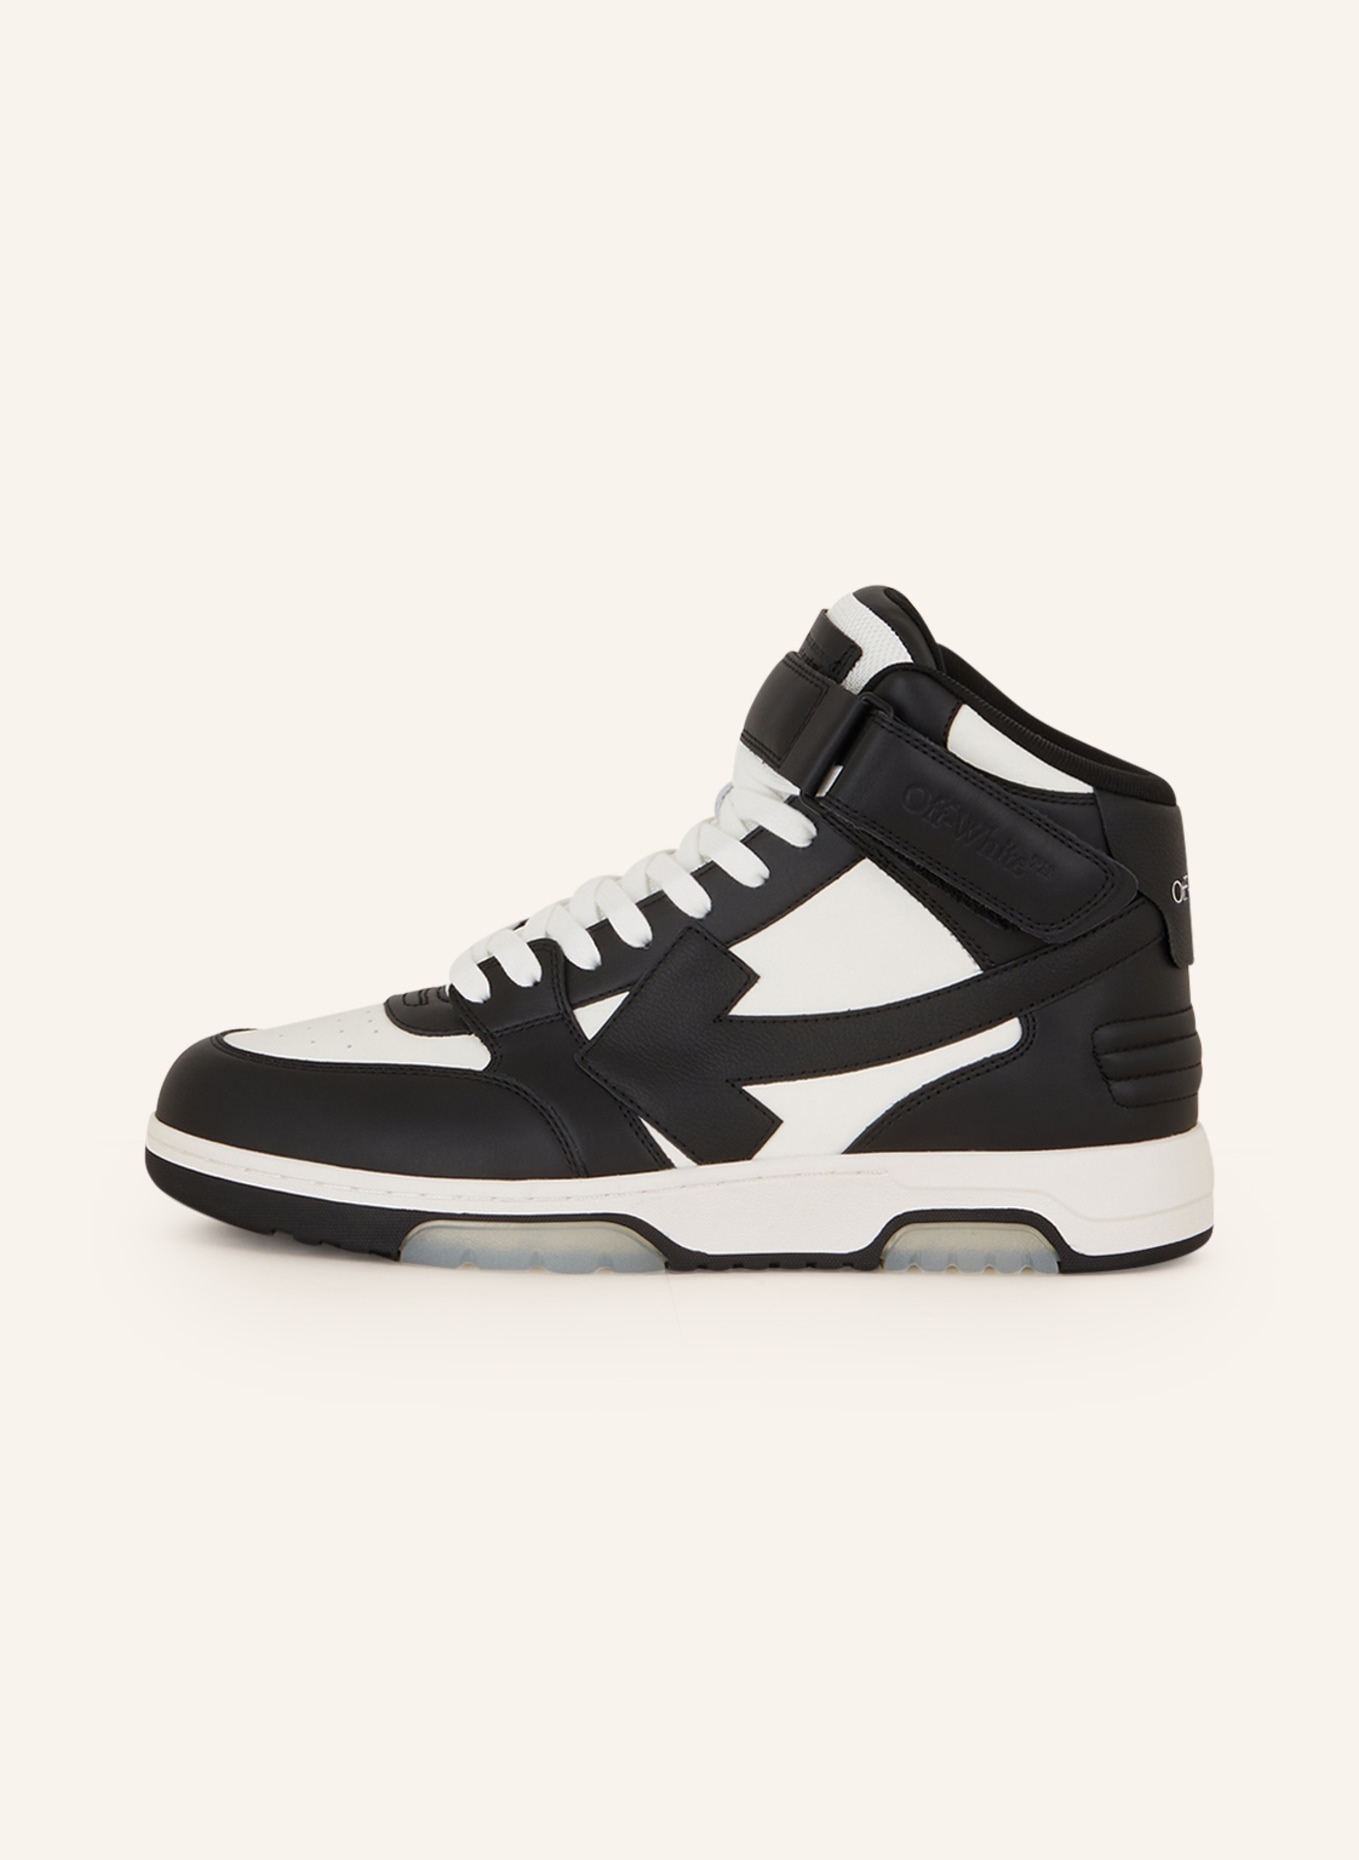 Off-White Hightop-Sneaker OUT OF OFFICE, Farbe: SCHWARZ/ WEISS (Bild 4)